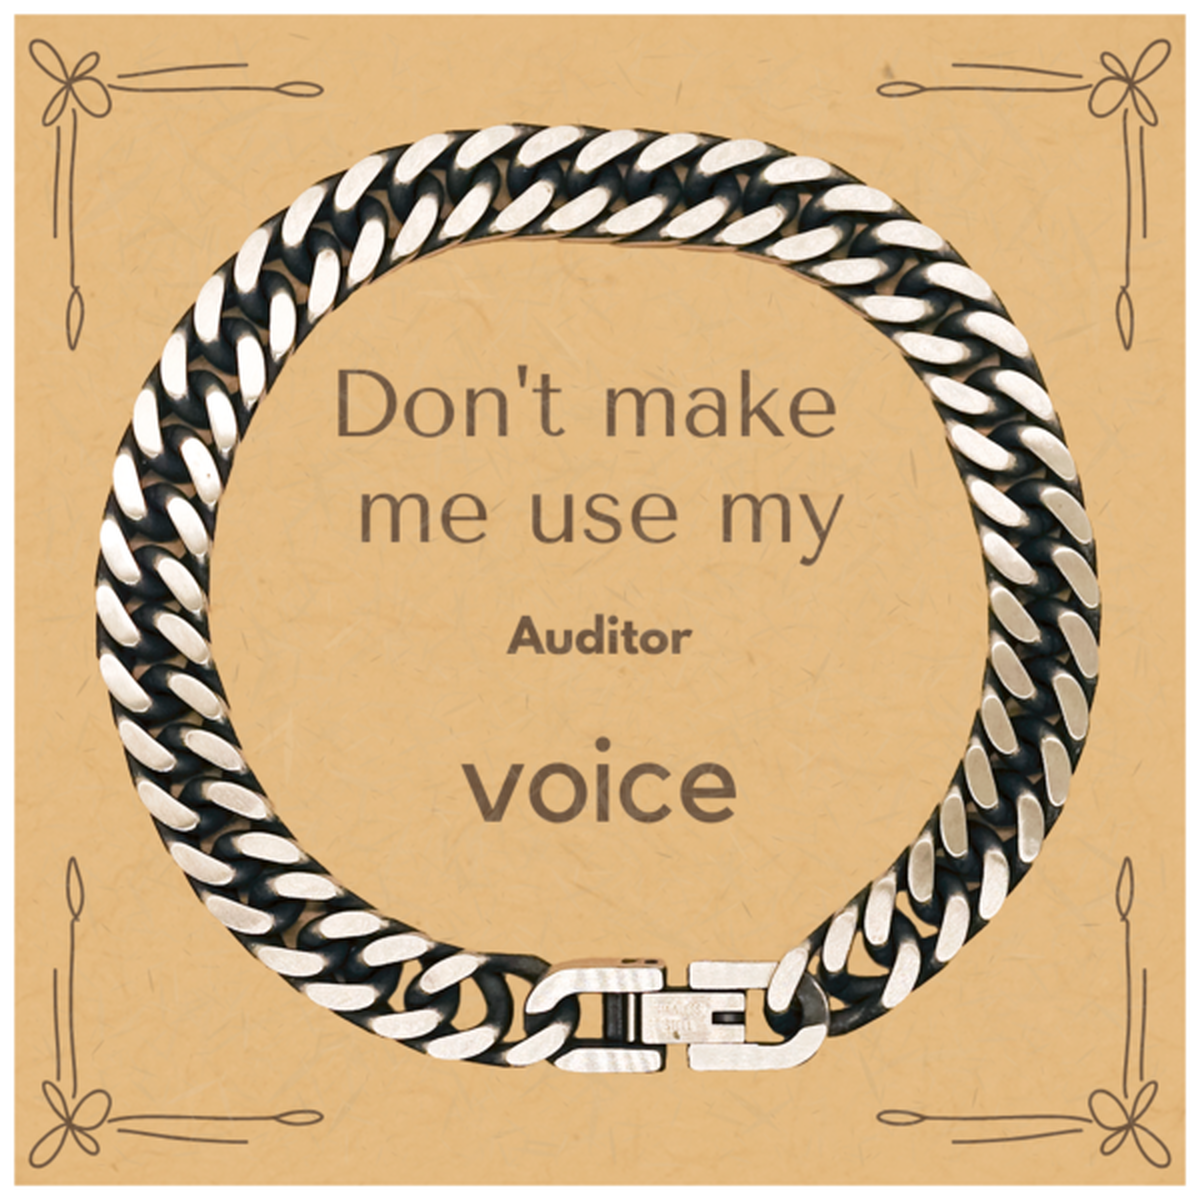 Don't make me use my Auditor voice, Sarcasm Auditor Card Gifts, Christmas Auditor Cuban Link Chain Bracelet Birthday Unique Gifts For Auditor Coworkers, Men, Women, Colleague, Friends